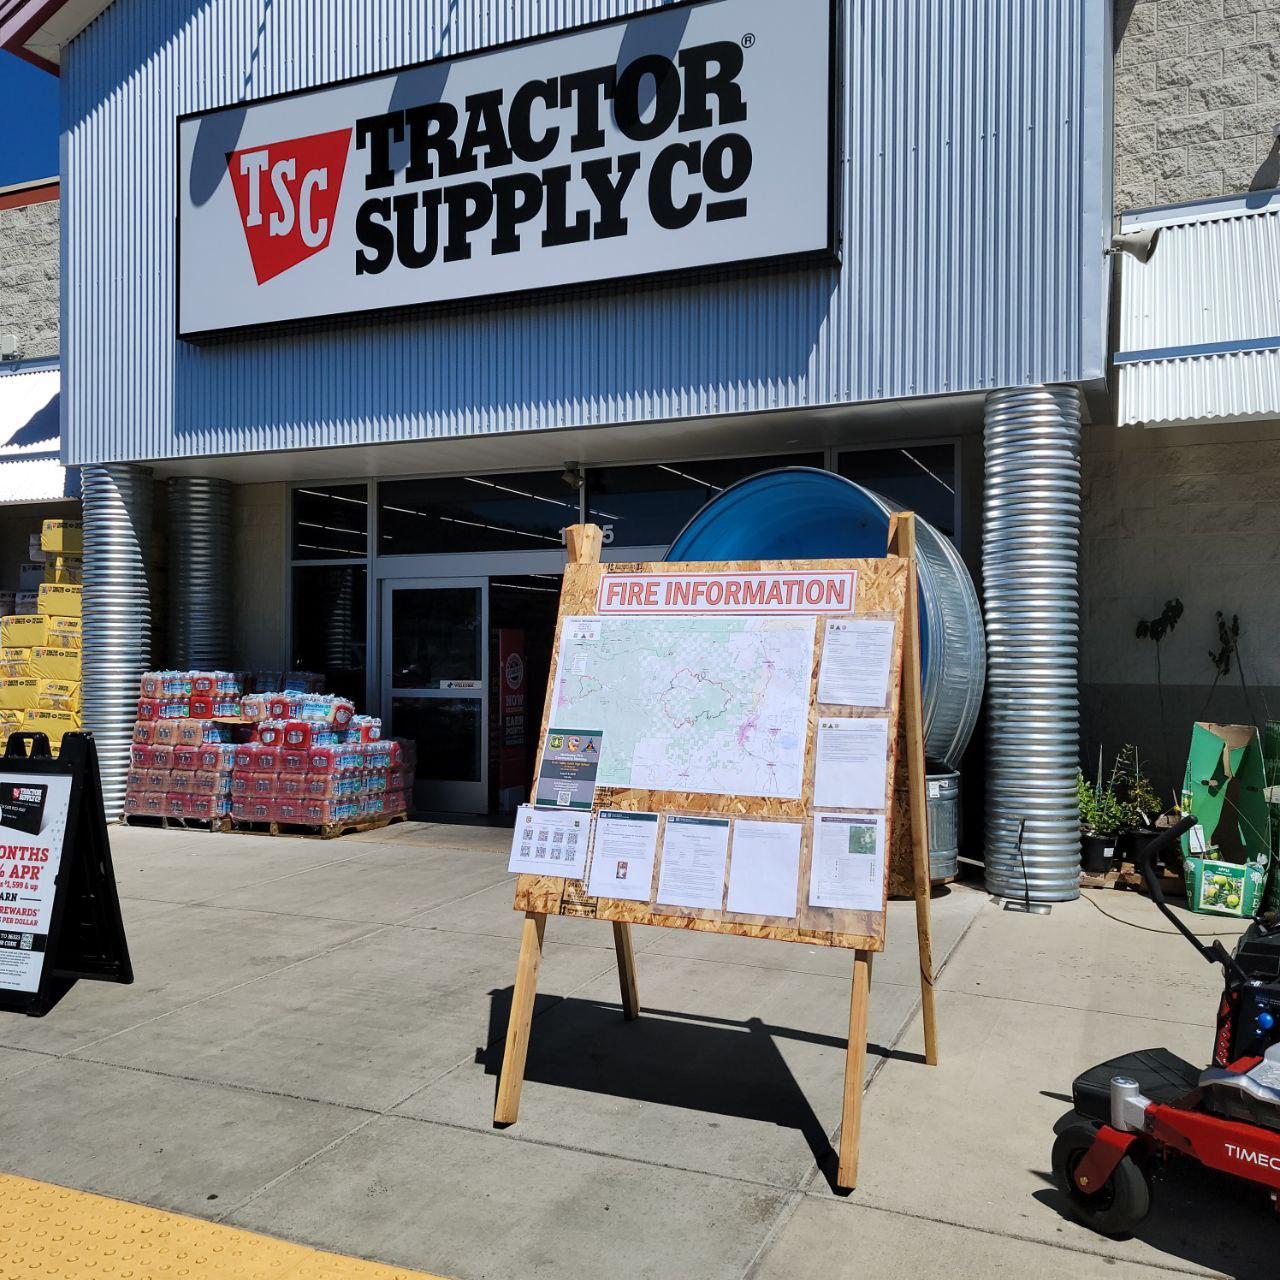 Fire Information board in front of Tractor Supply Co in Yreka CA.